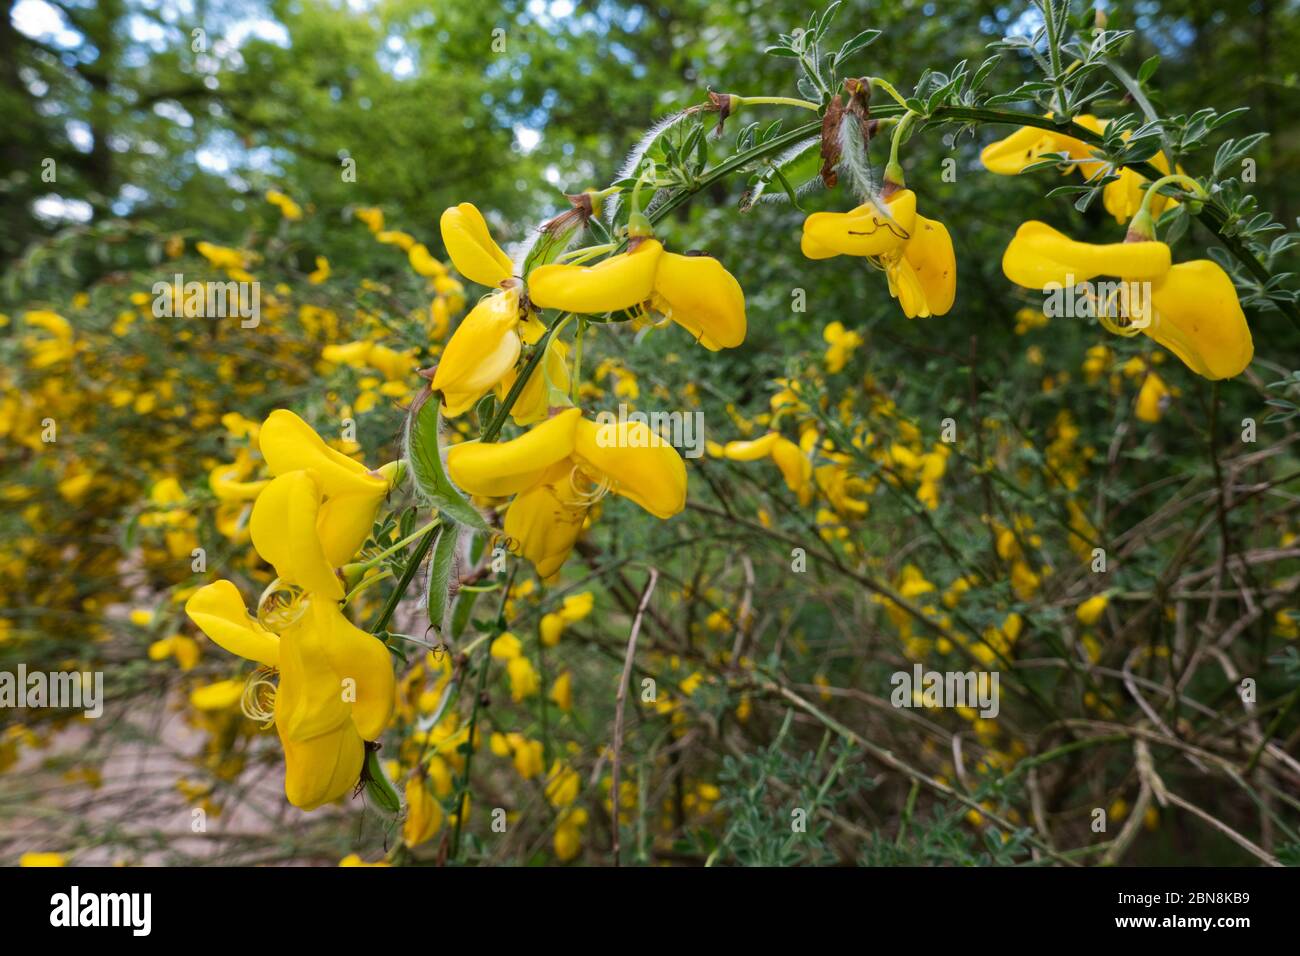 Golden yellow flowers and young seed pods on Common broom, also known as Scotch broom Stock Photo